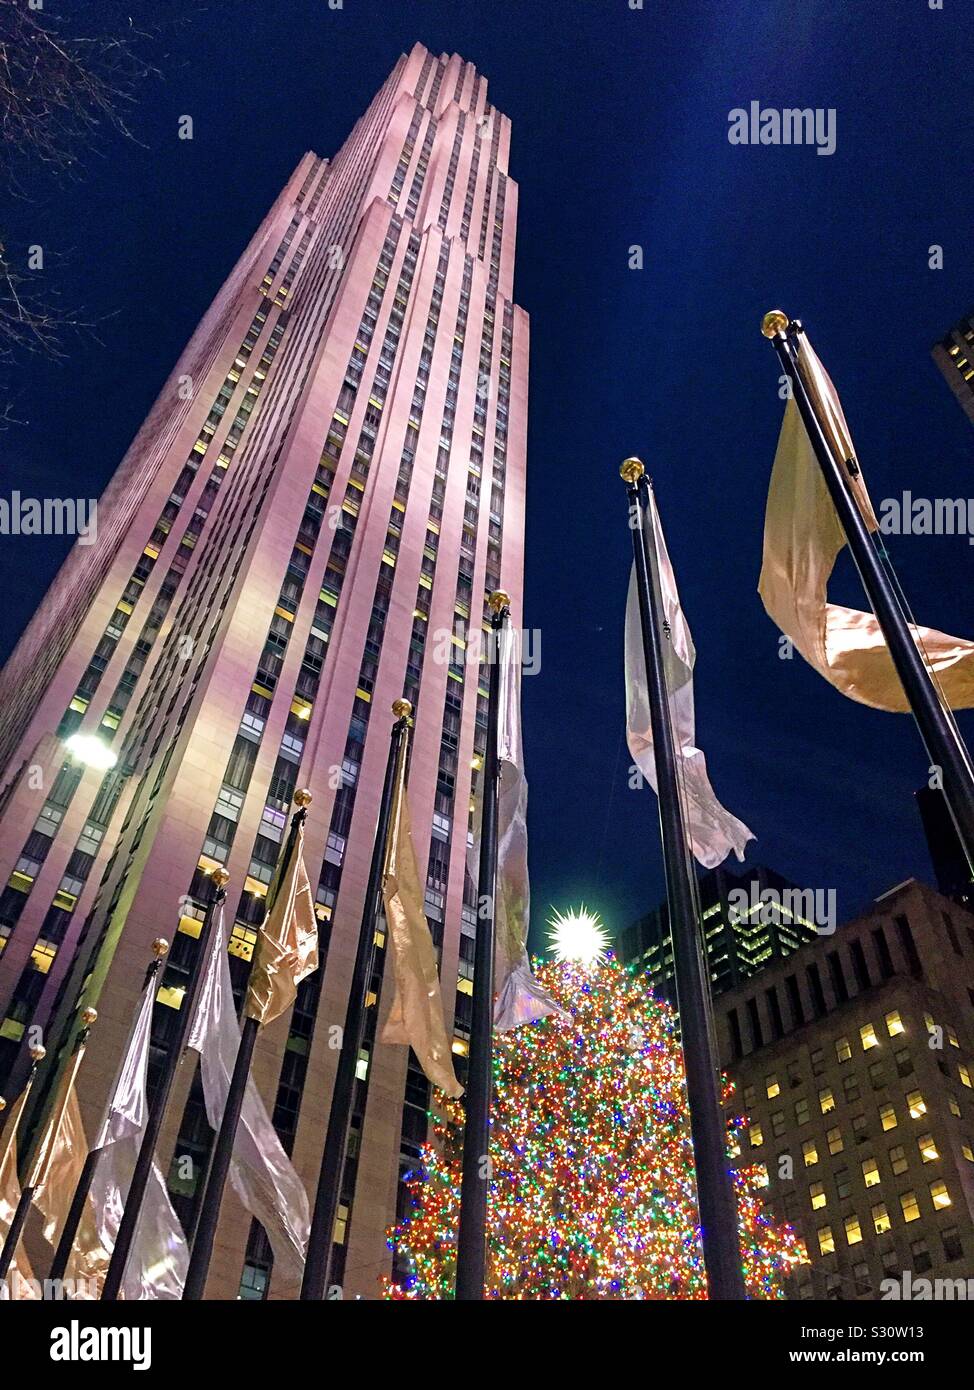 The iconic Christmas tree in Rockefeller Center is at the base of 30 rock skyscraper, NYC, USA Stock Photo